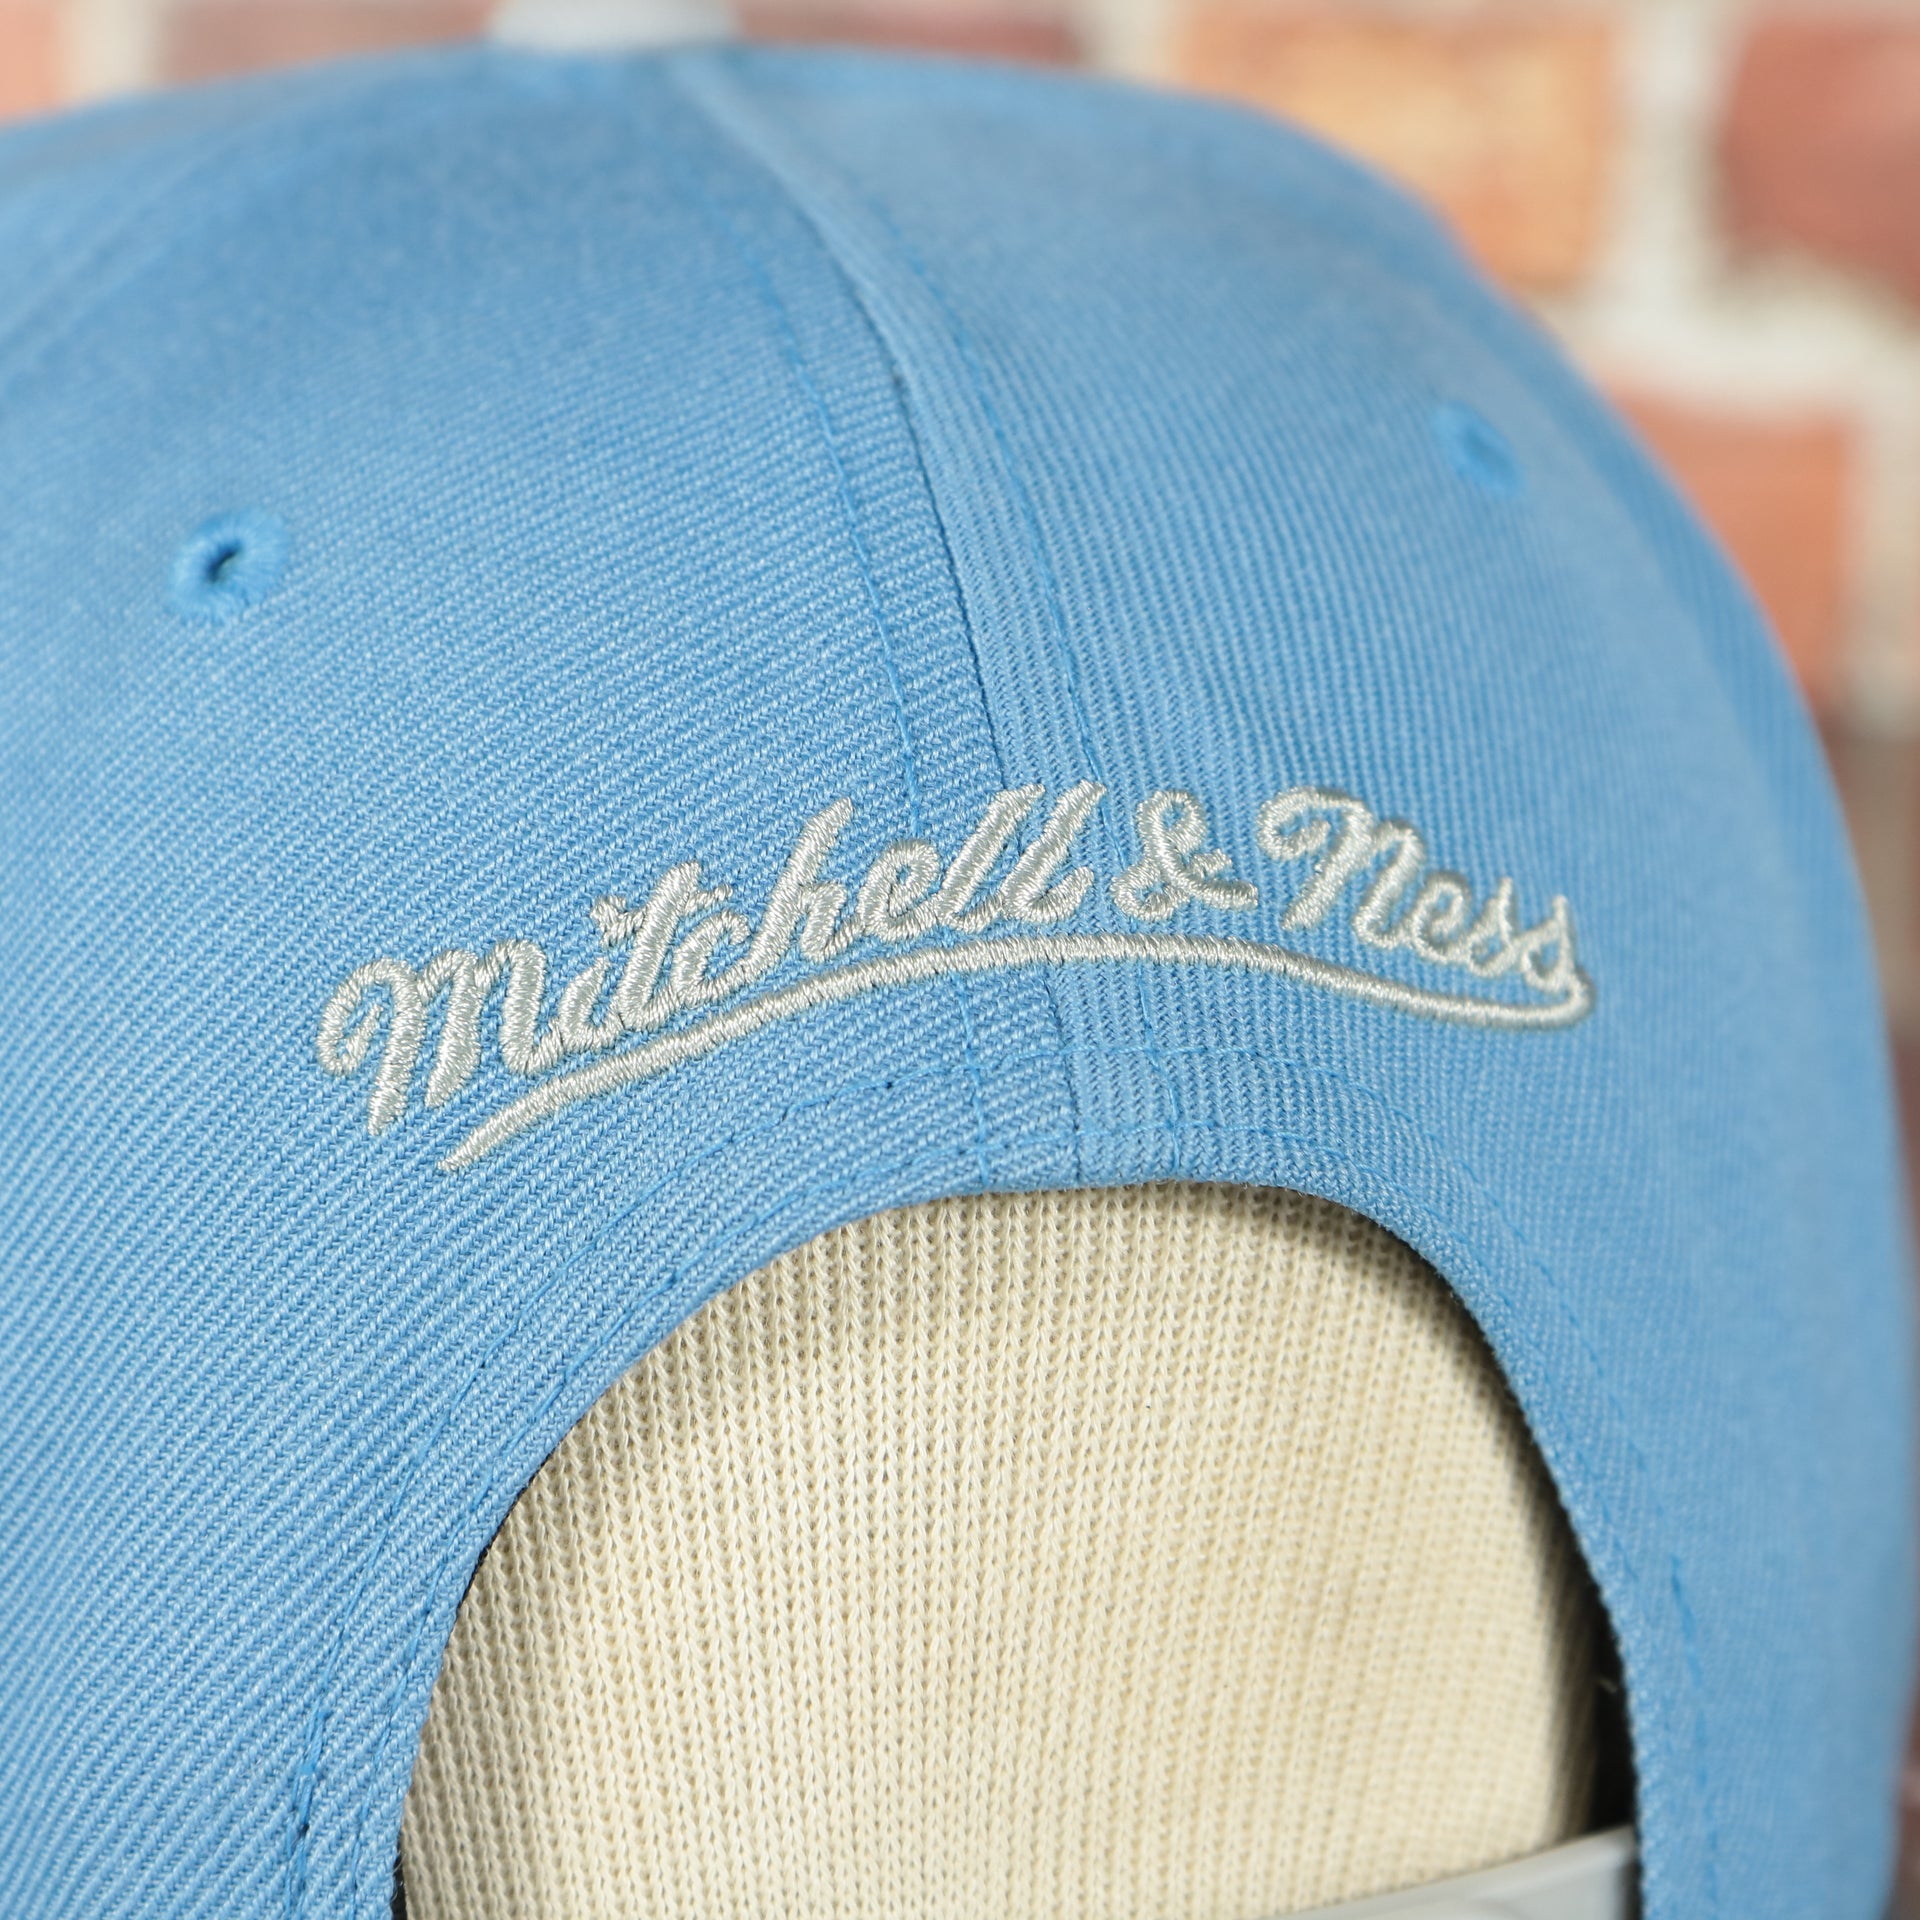 mitchell and ness logo on the MITCHELL AND NESS REFLECTIVE TRI POP SNAPBACK, NEW YORK CITY FOOTBALL CLUB, OSFM